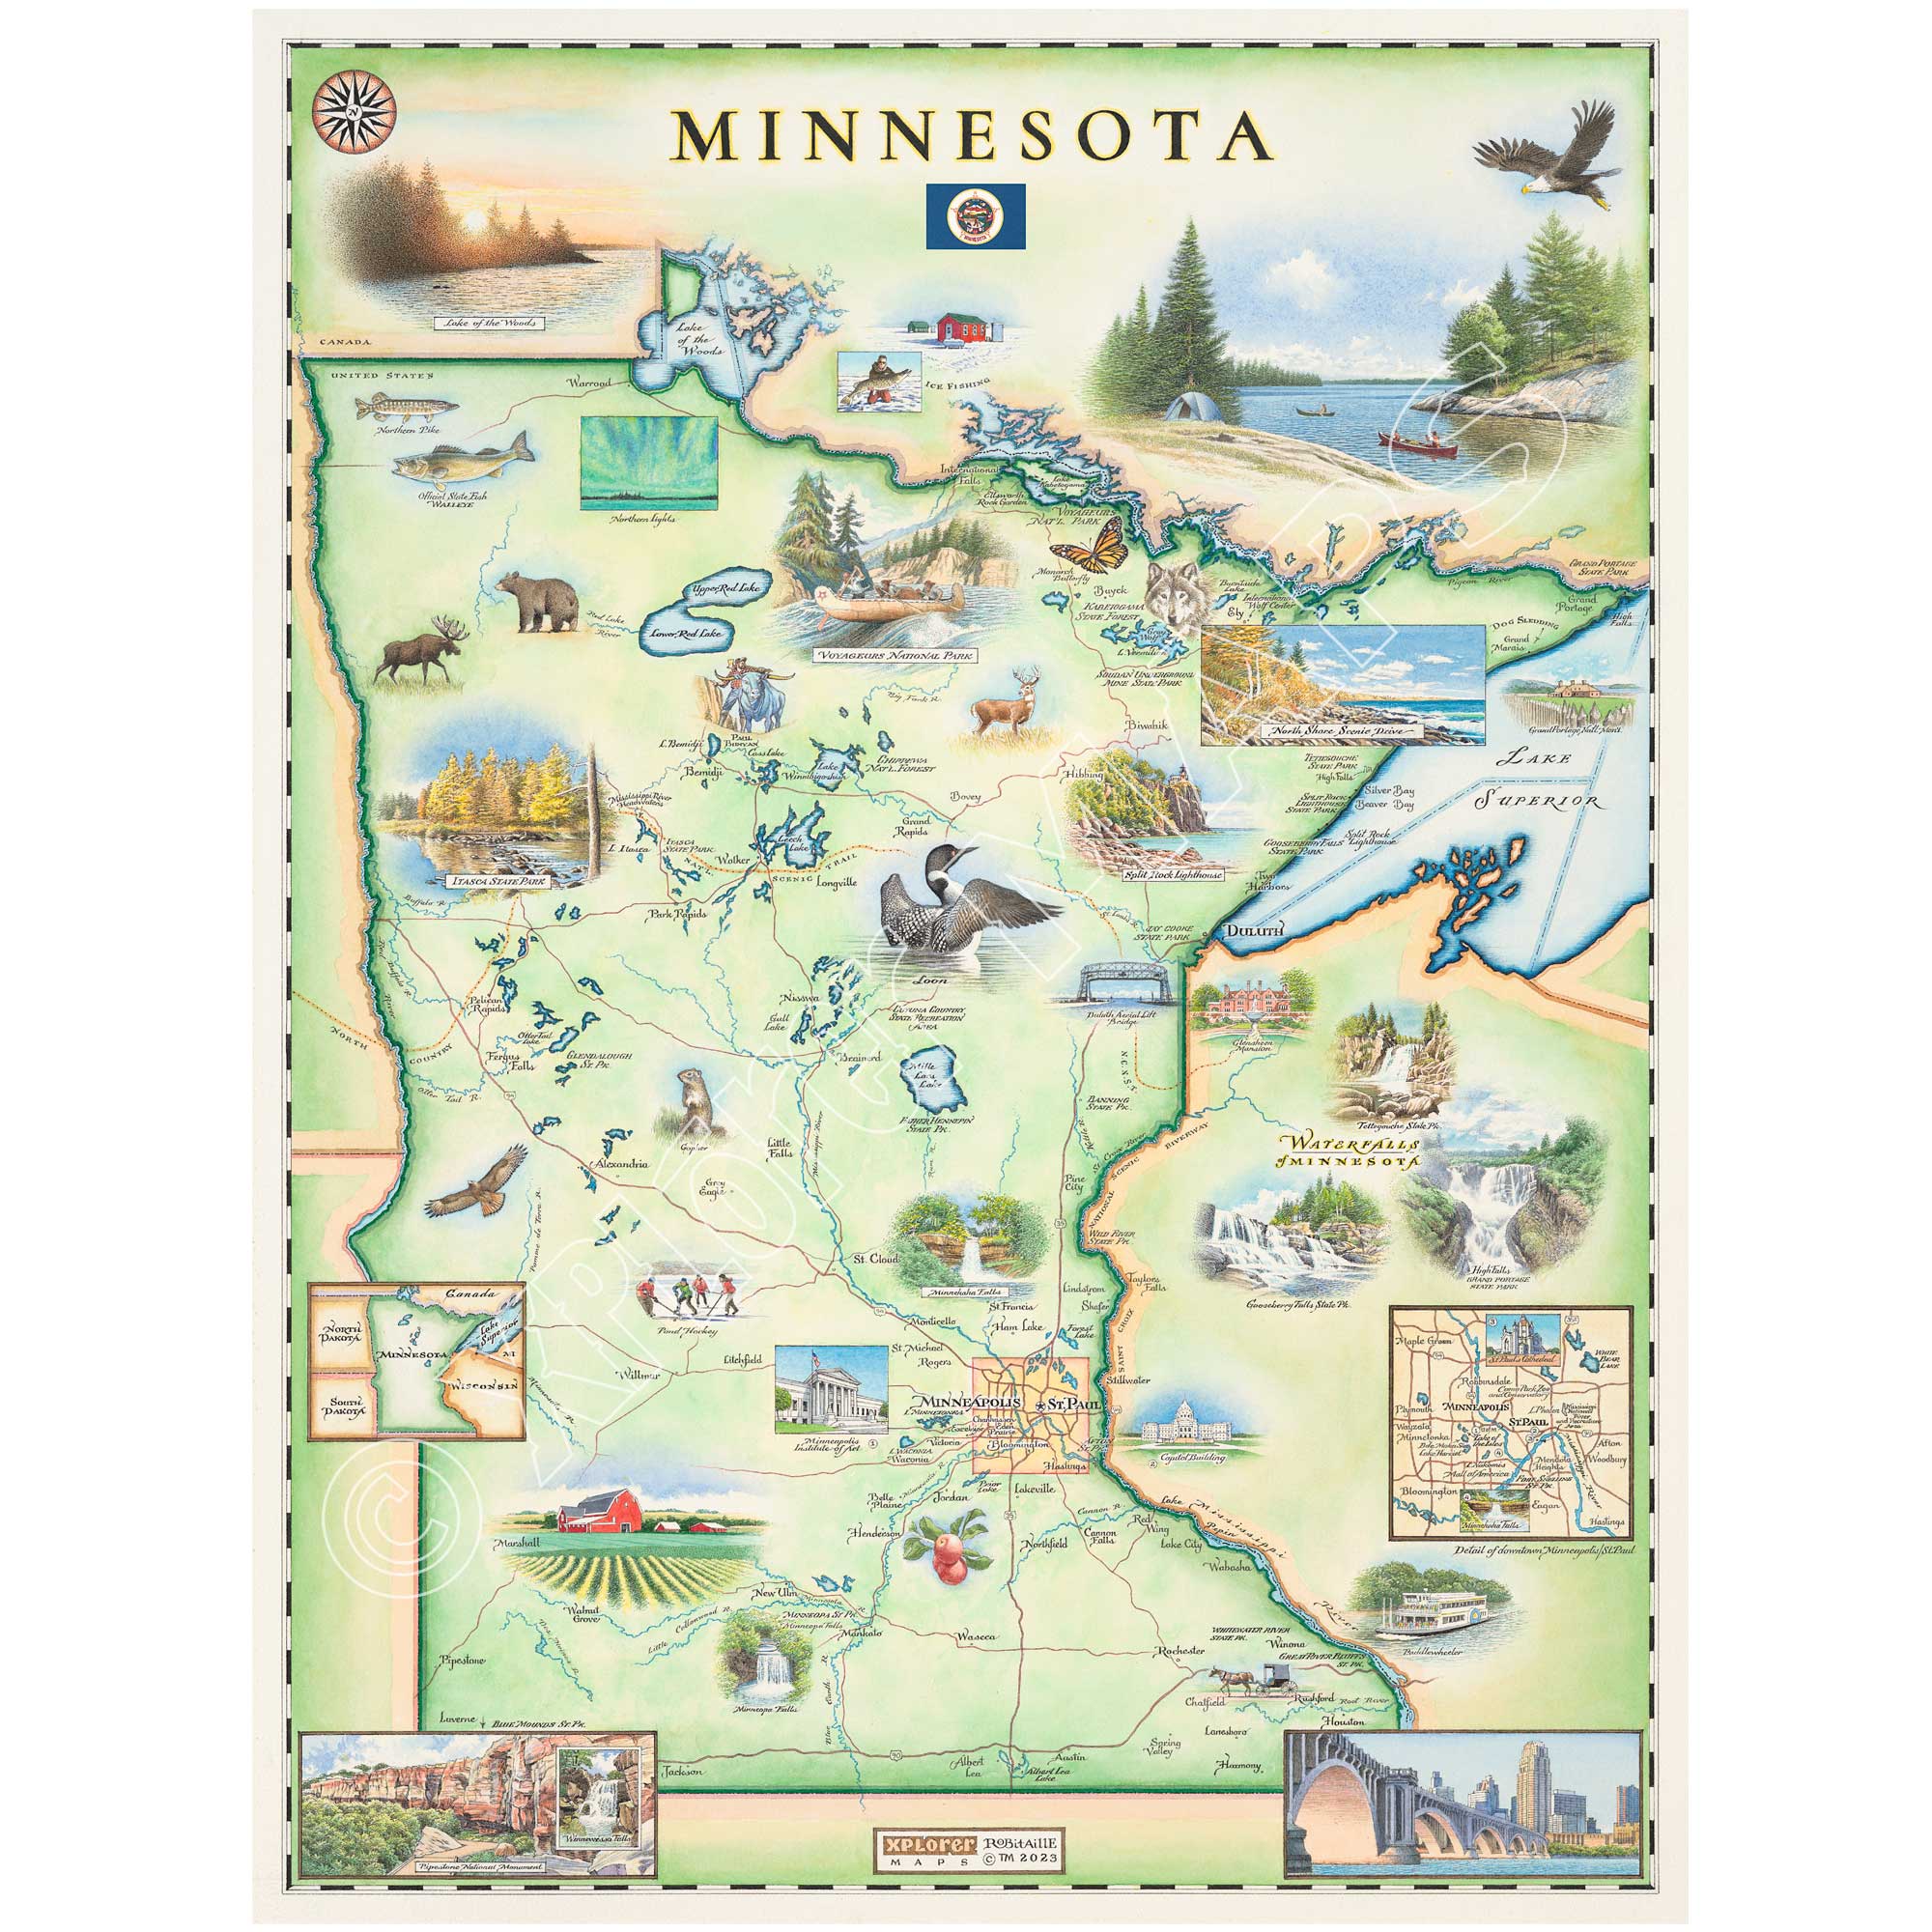 Minnesota State hand-drawn map in earth-tone colors. The print by Xplorer Maps features waterfalls, Lake Superior, Lake in the Woods, Split Rock Lighthouse, Paul Bunyan, Itasca State Park, and the capitol building. Animals like bear, moose, and loon. Measures 18x24.